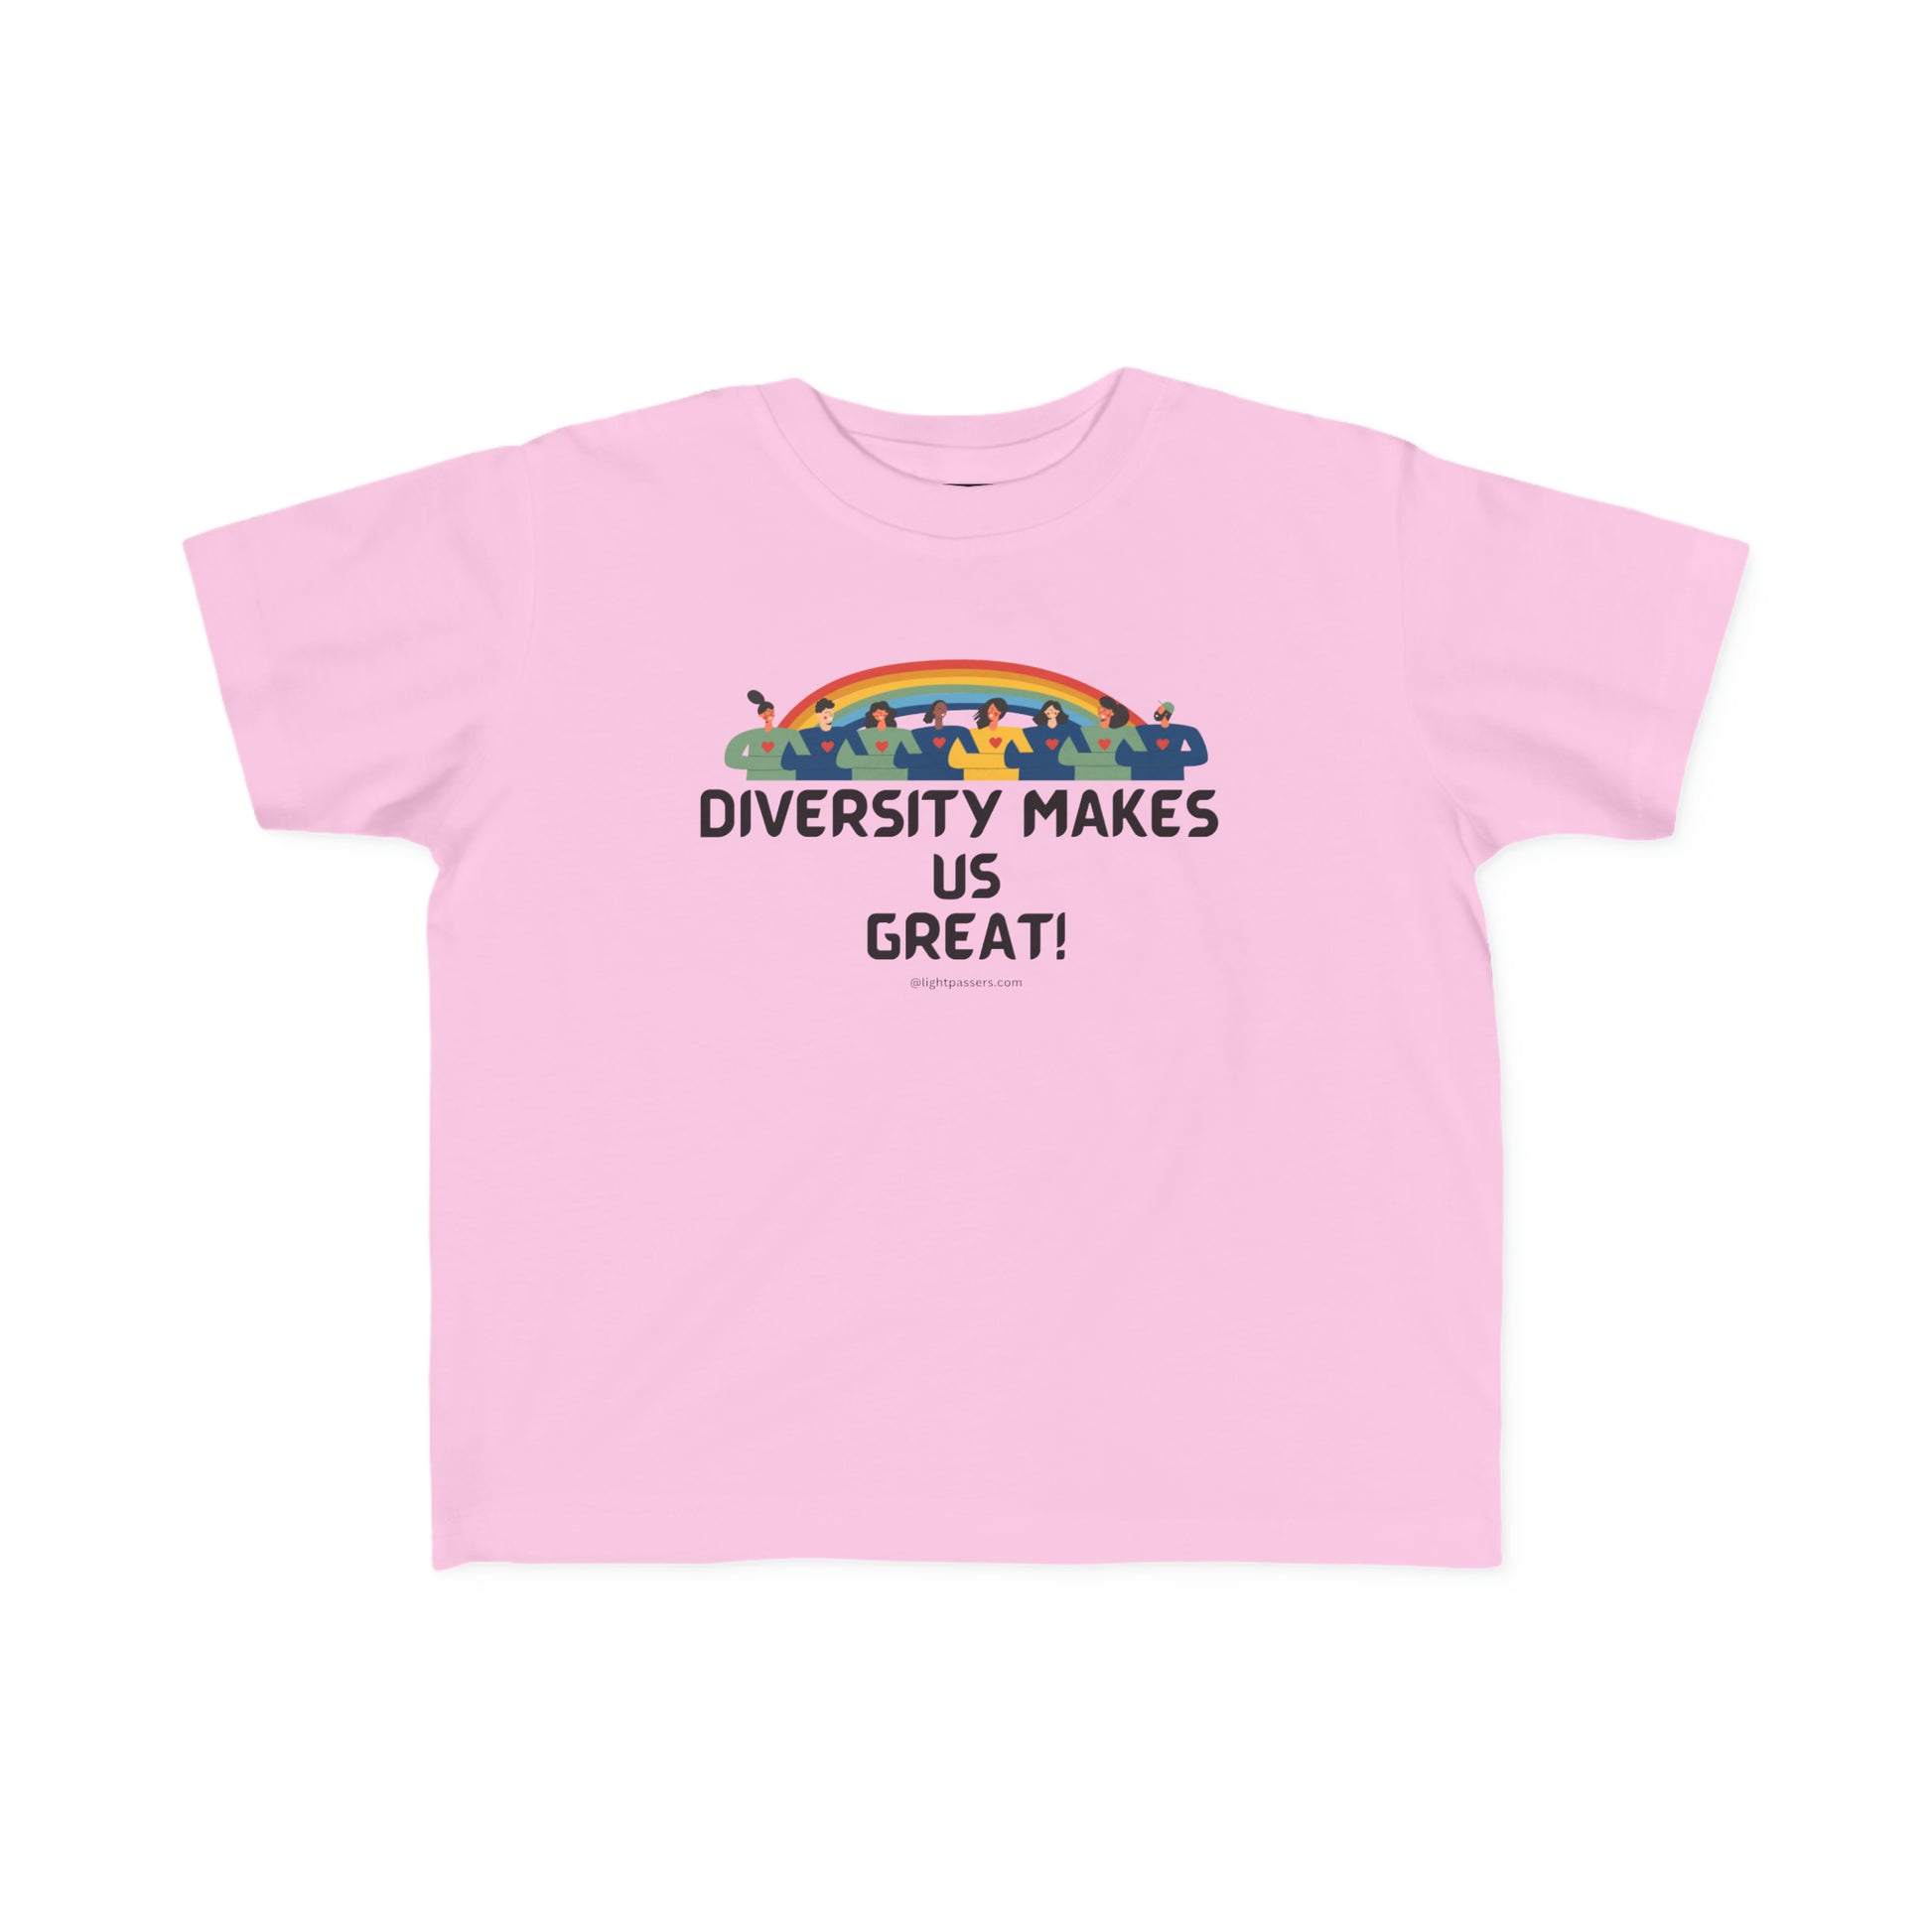 A toddler tee featuring Diversity Makes Us Great text with a rainbow design. Soft 100% combed cotton, durable print, tear-away label, and a classic fit. Ideal for sensitive skin.